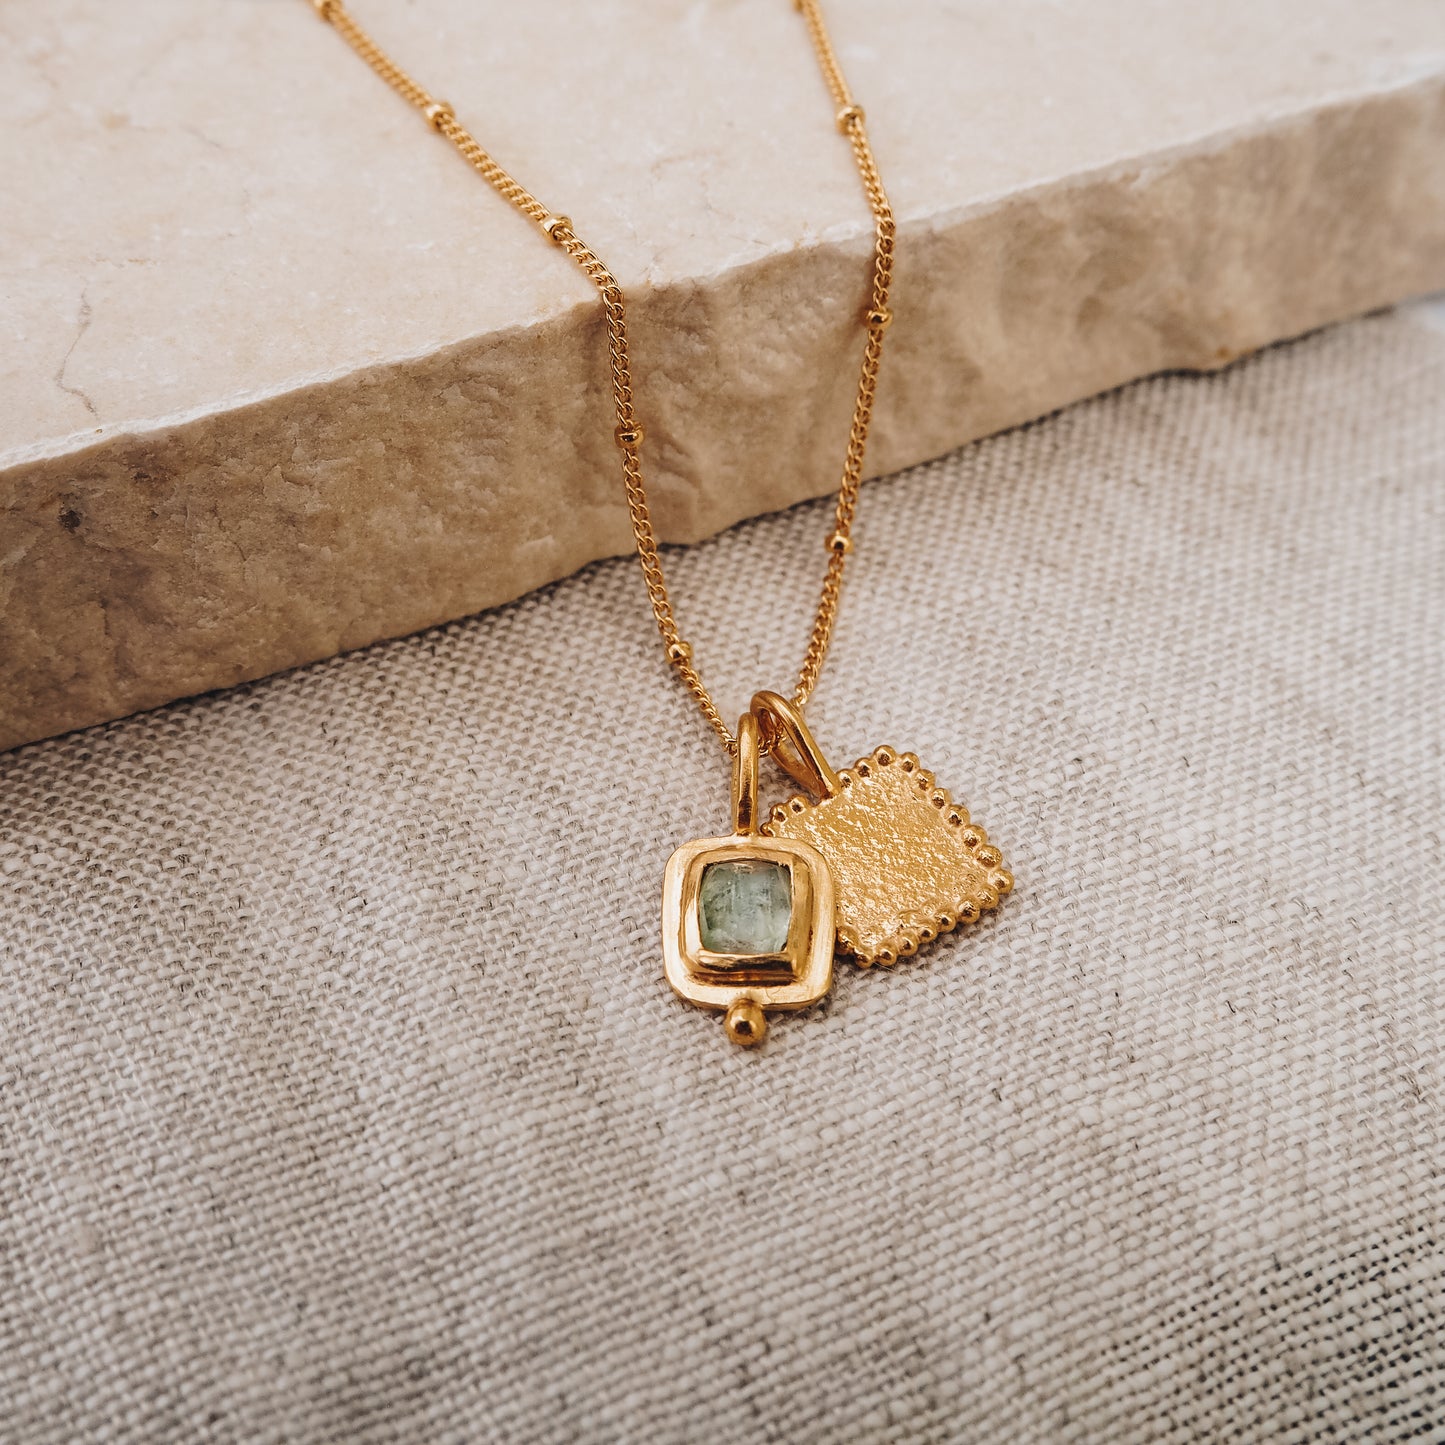 A gold satellite chain with an organically textured pendant and a blue tourmaline gemstone.